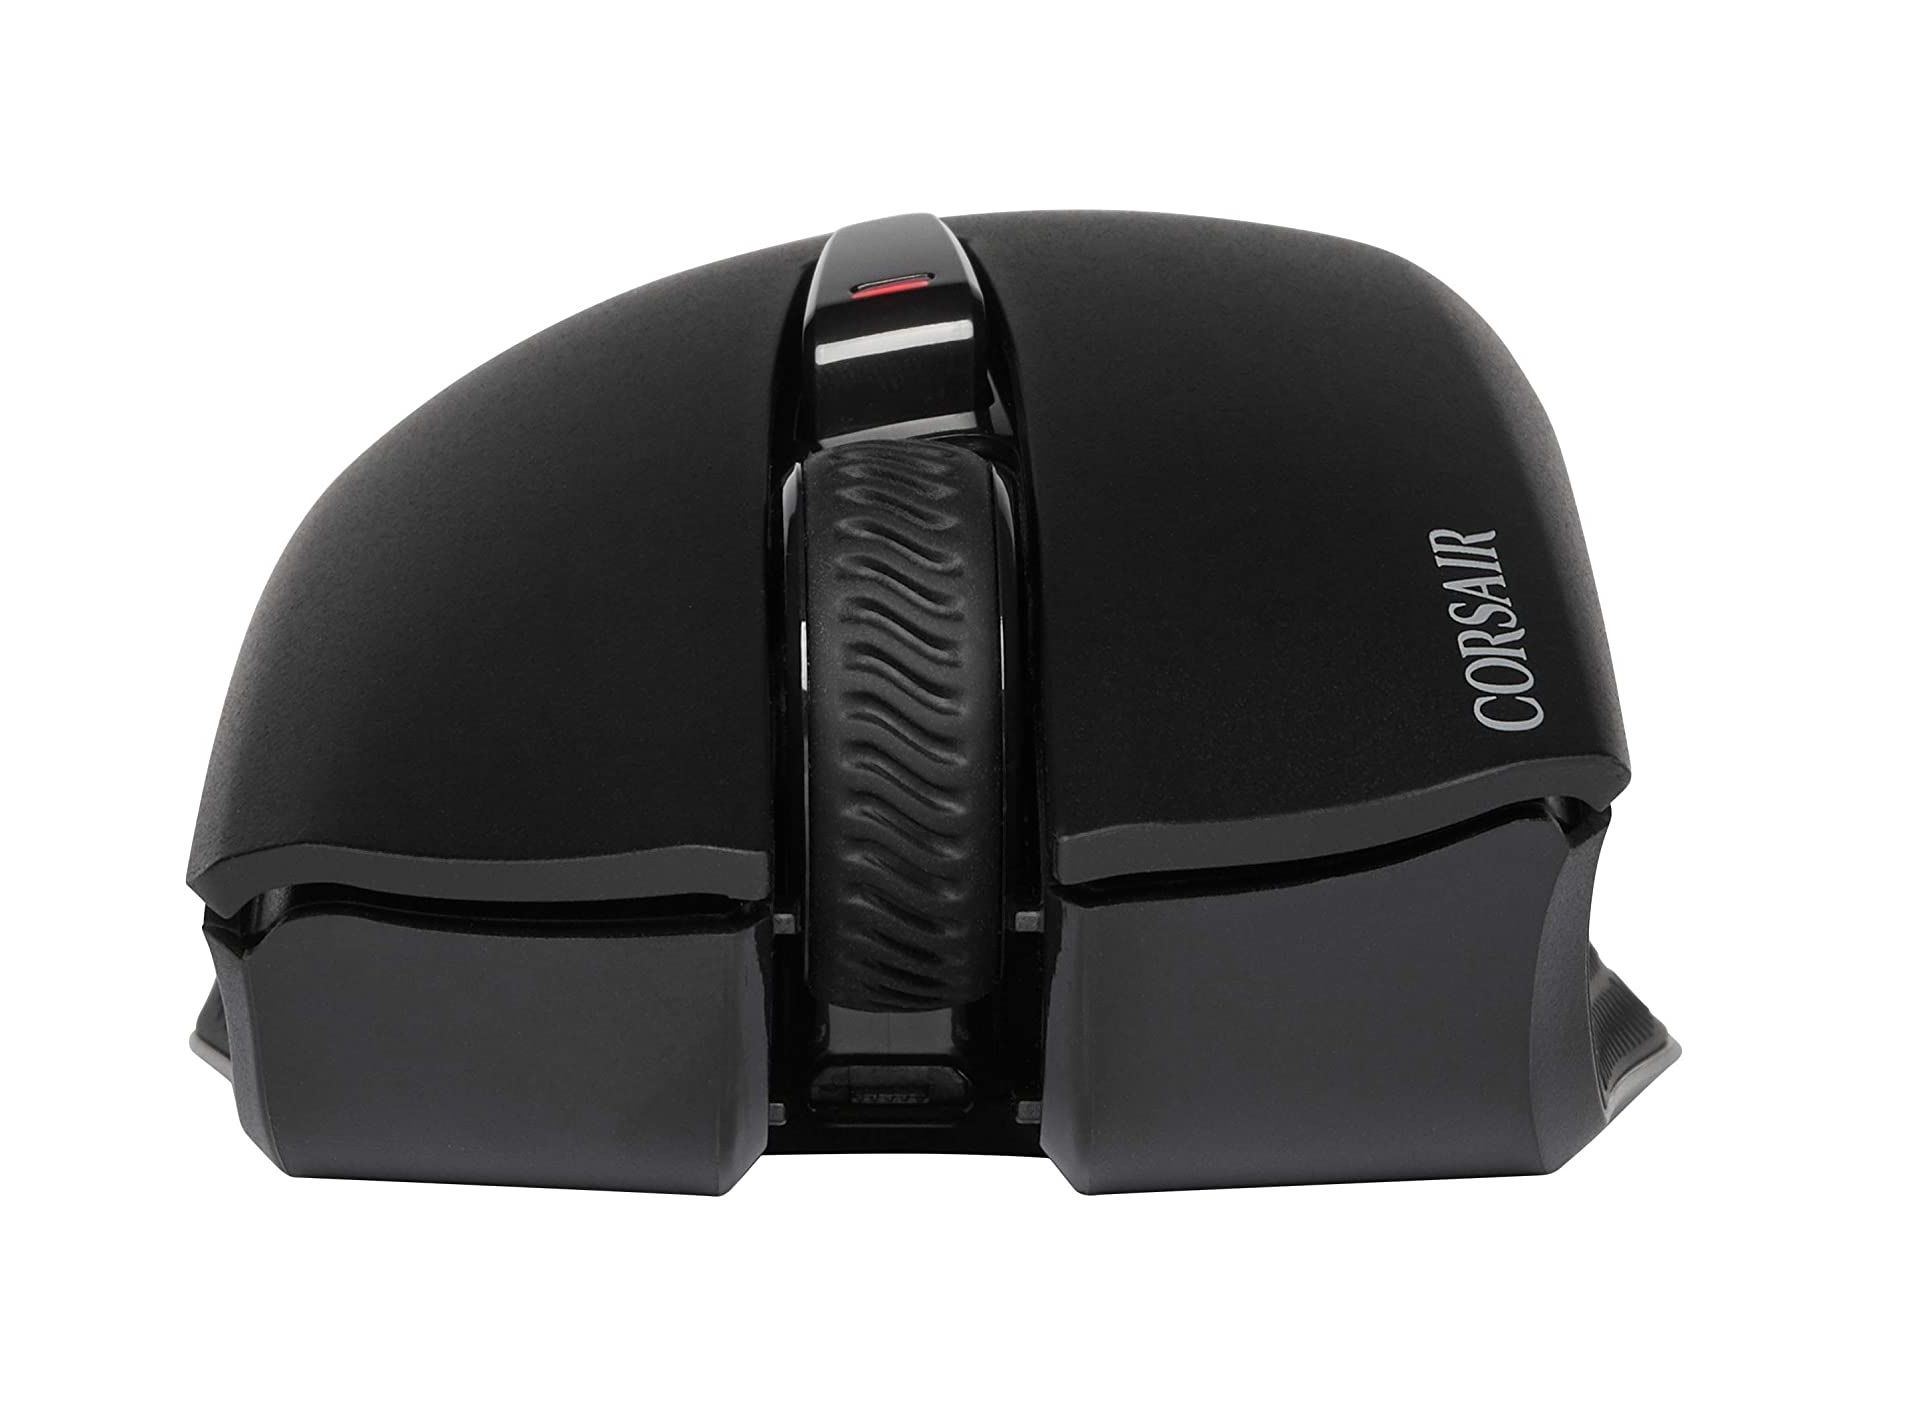 the corsair harpoon rgb wireless gaming mouse viewed from the front